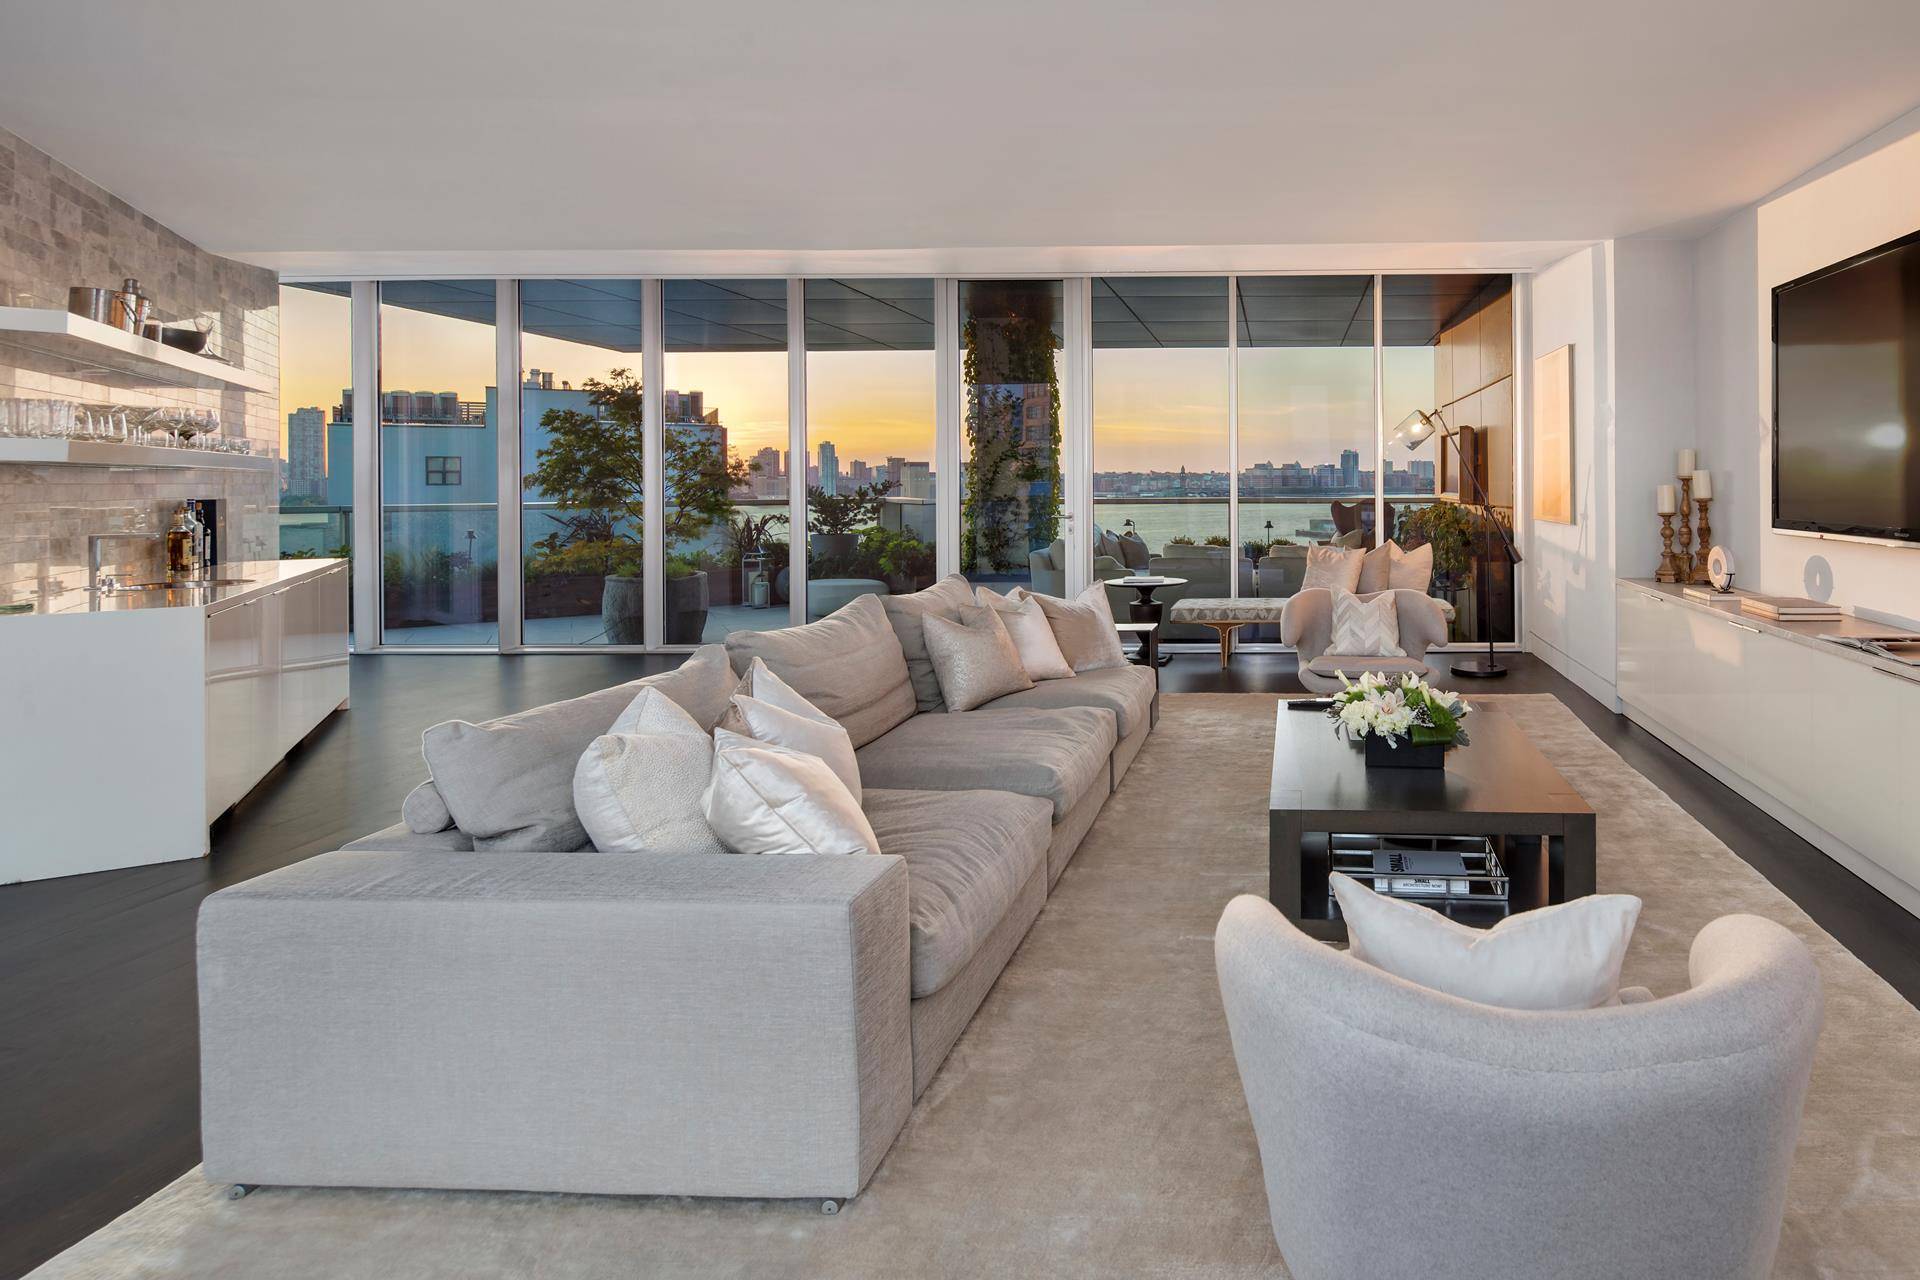 PENTHOUSE 5 BED 6 BATH PRIVATE ROOF 4400SF PRIVATE OUTDOOR SPACE